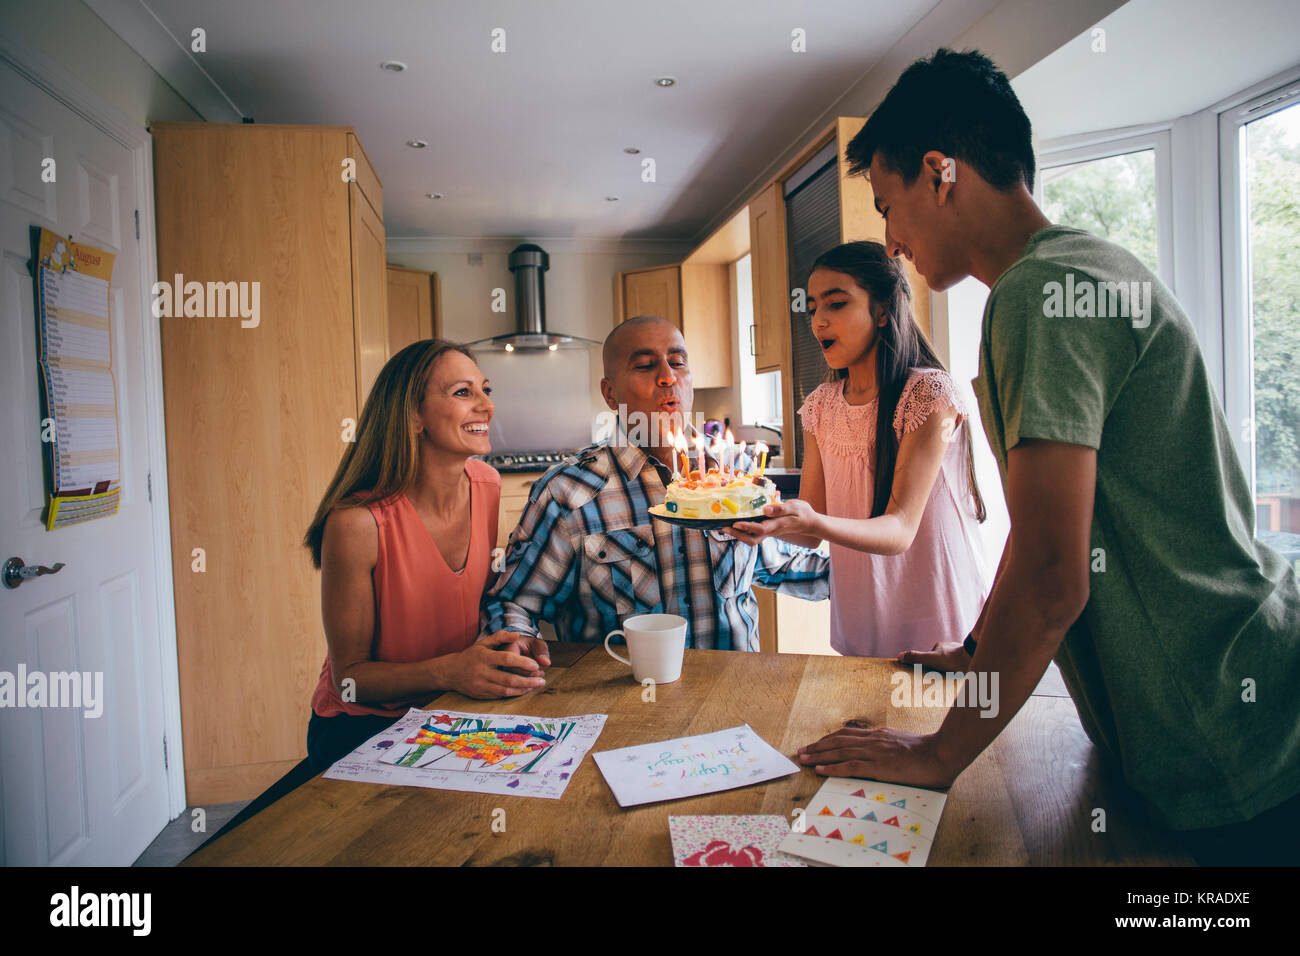 Blow out the candles! Stock Photo